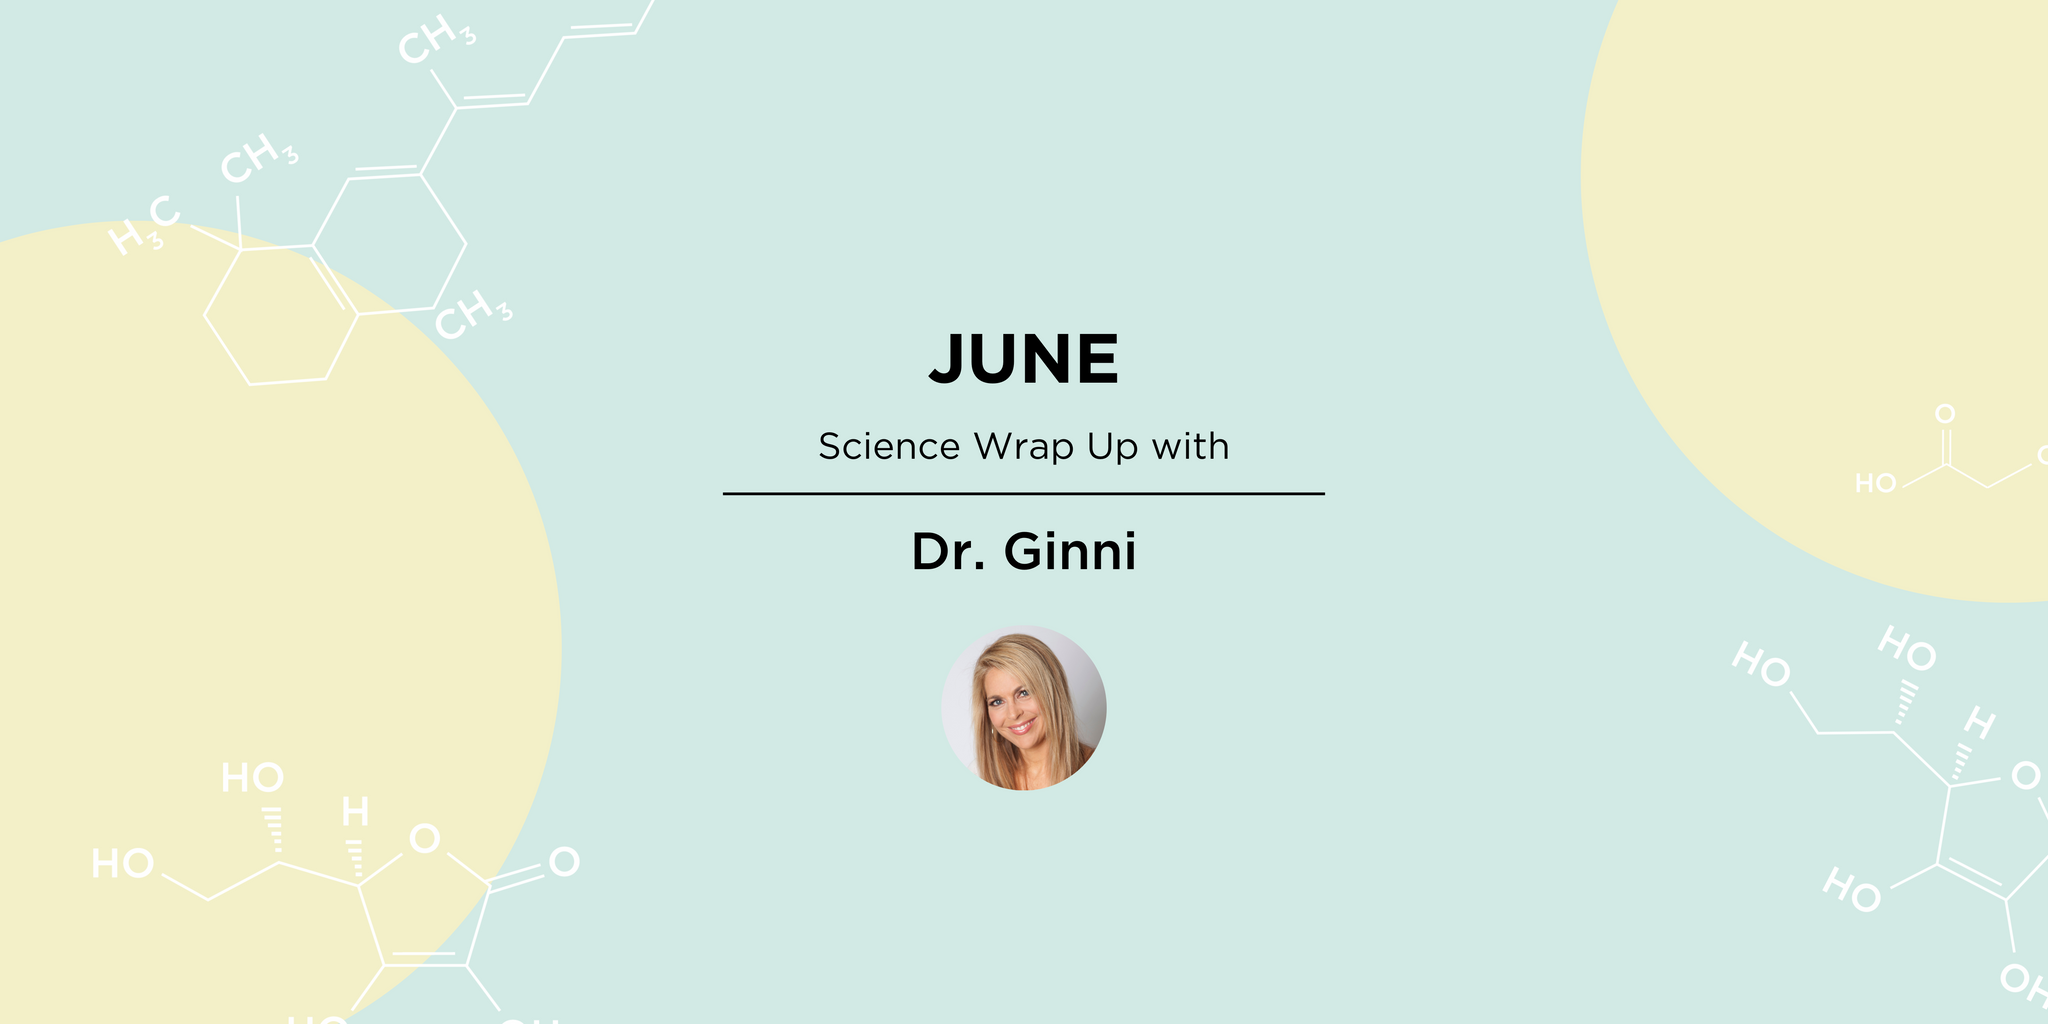 June Science Wrap Up with Dr. Ginni Mansberg